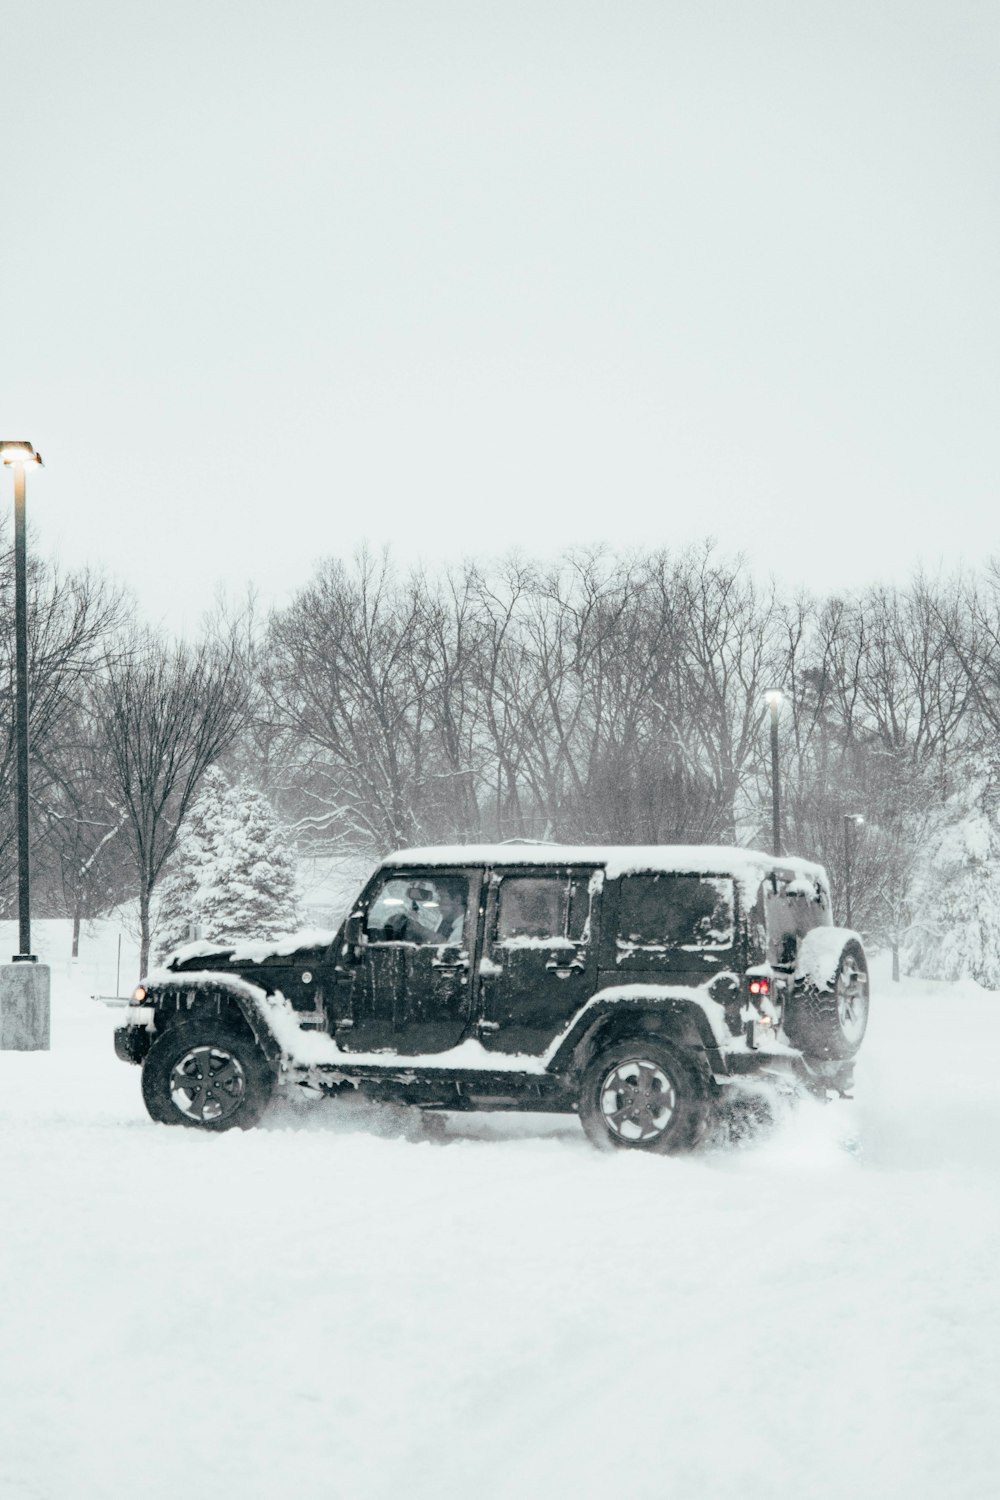 a jeep driving through the snow in a parking lot